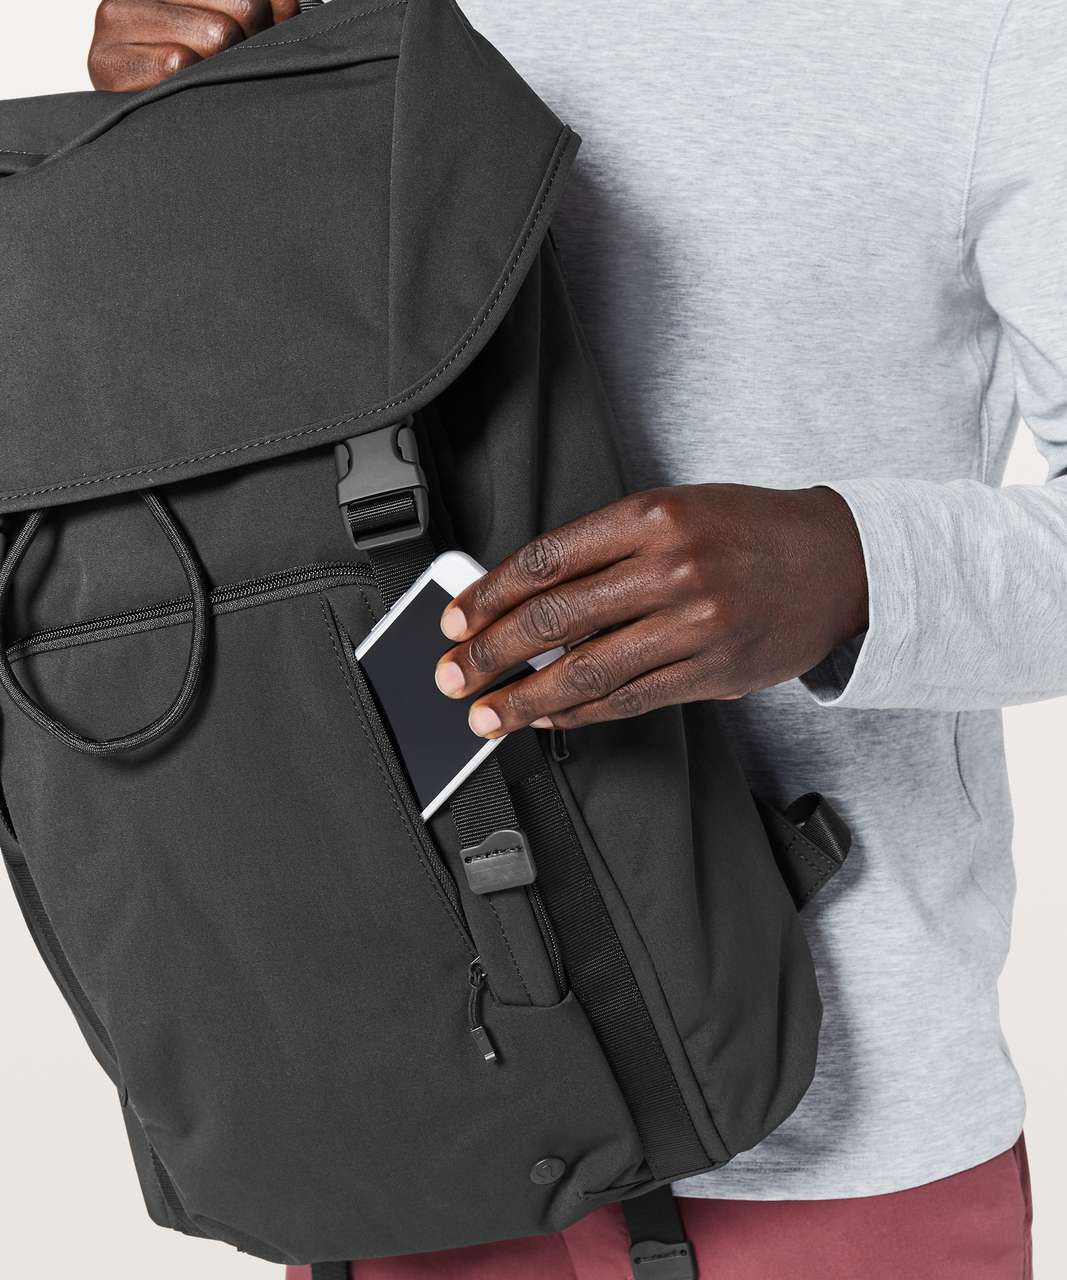 lululemon command the day backpack review